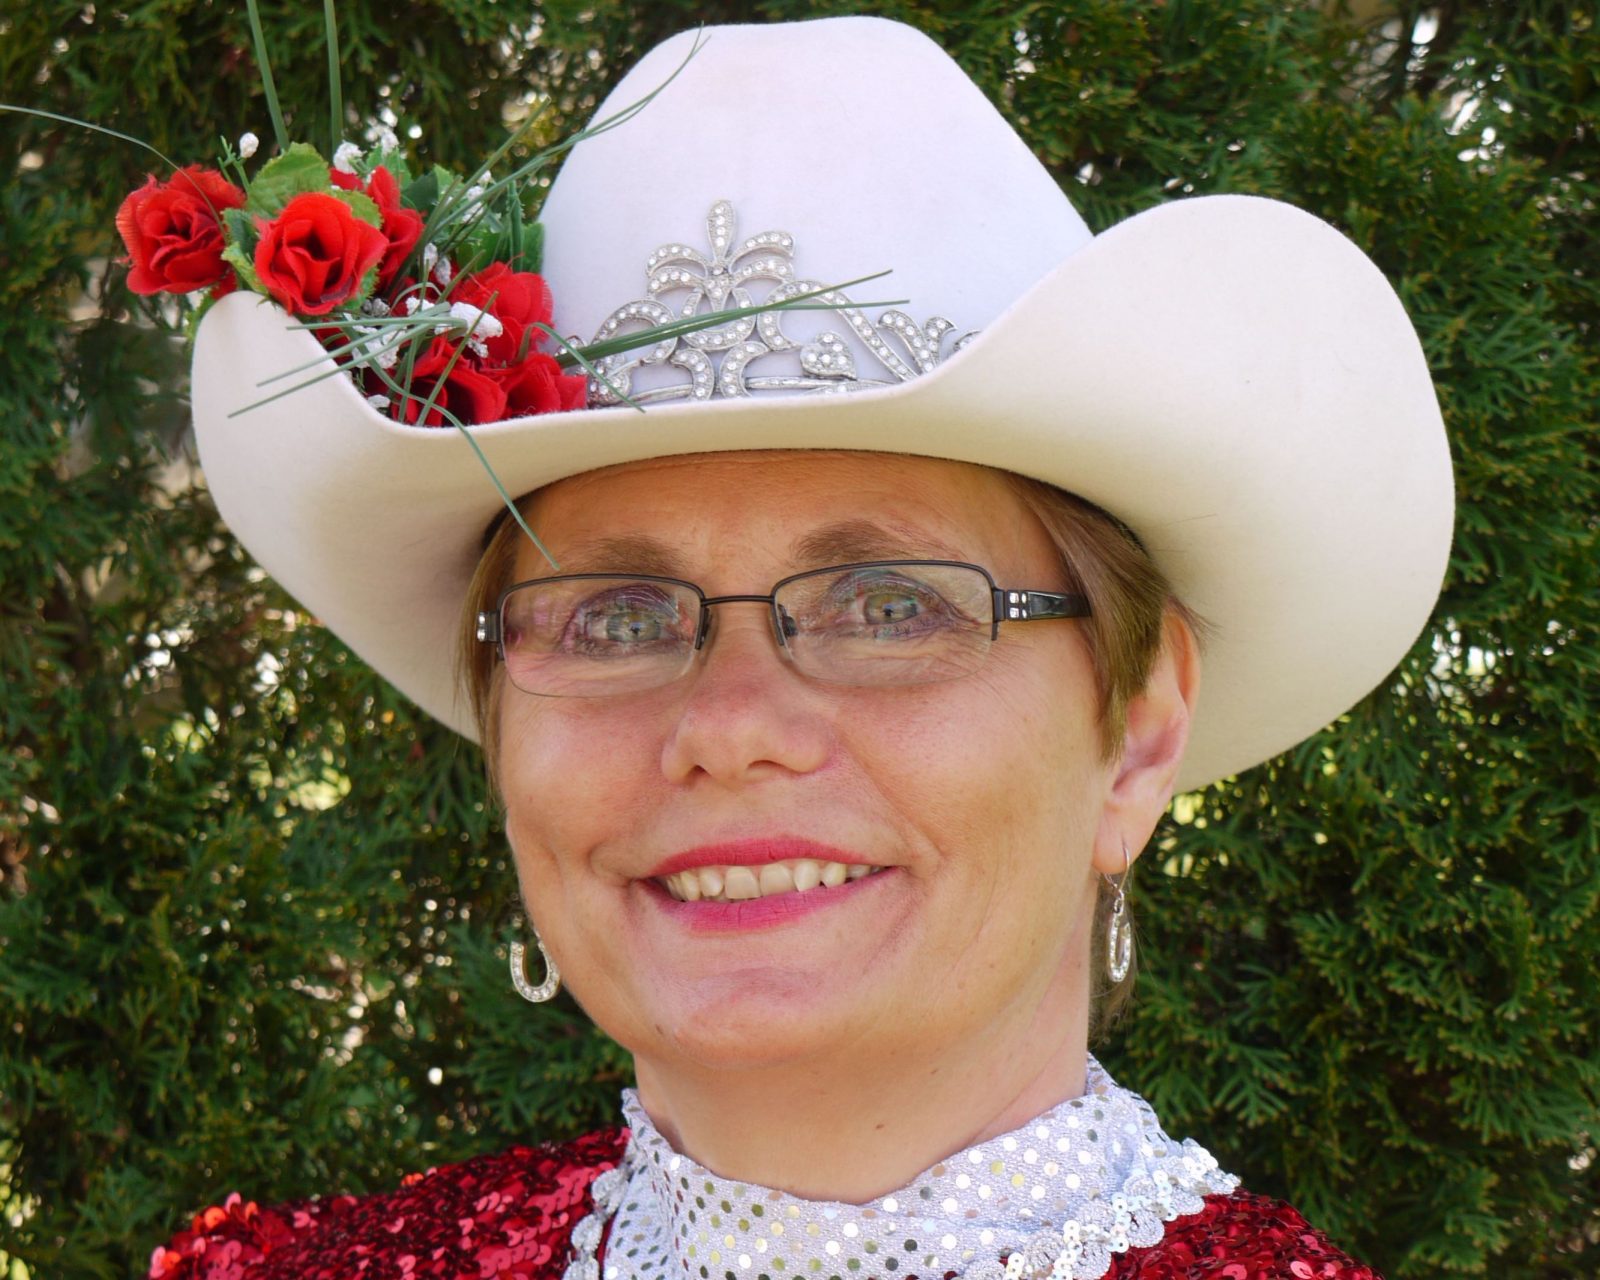 Canadian Cowgirls will be riding into the Avonmore Fair this weekend